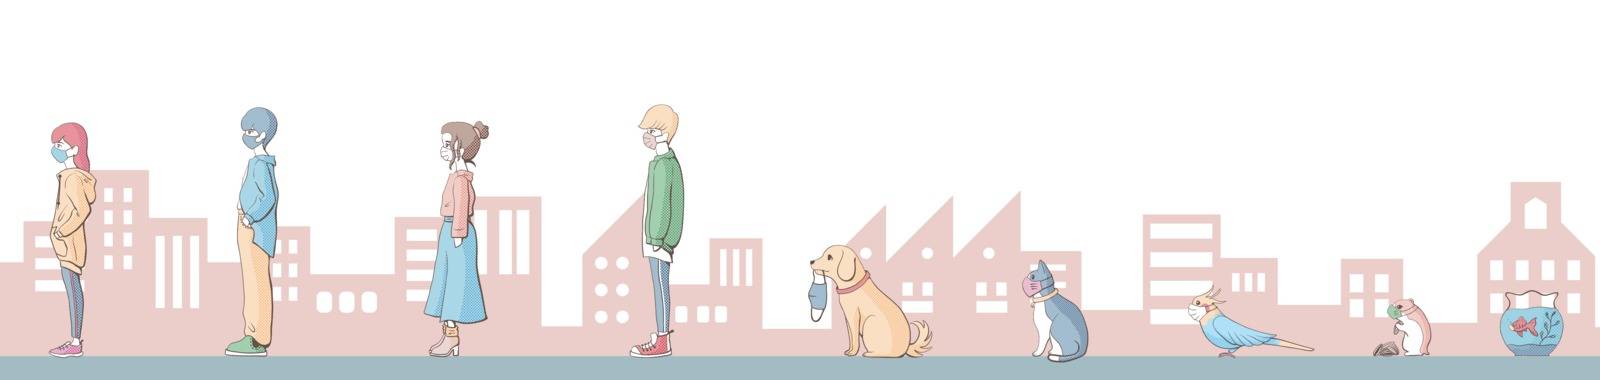 Keep Social distance with pets.Social distancing.Flat illustration.